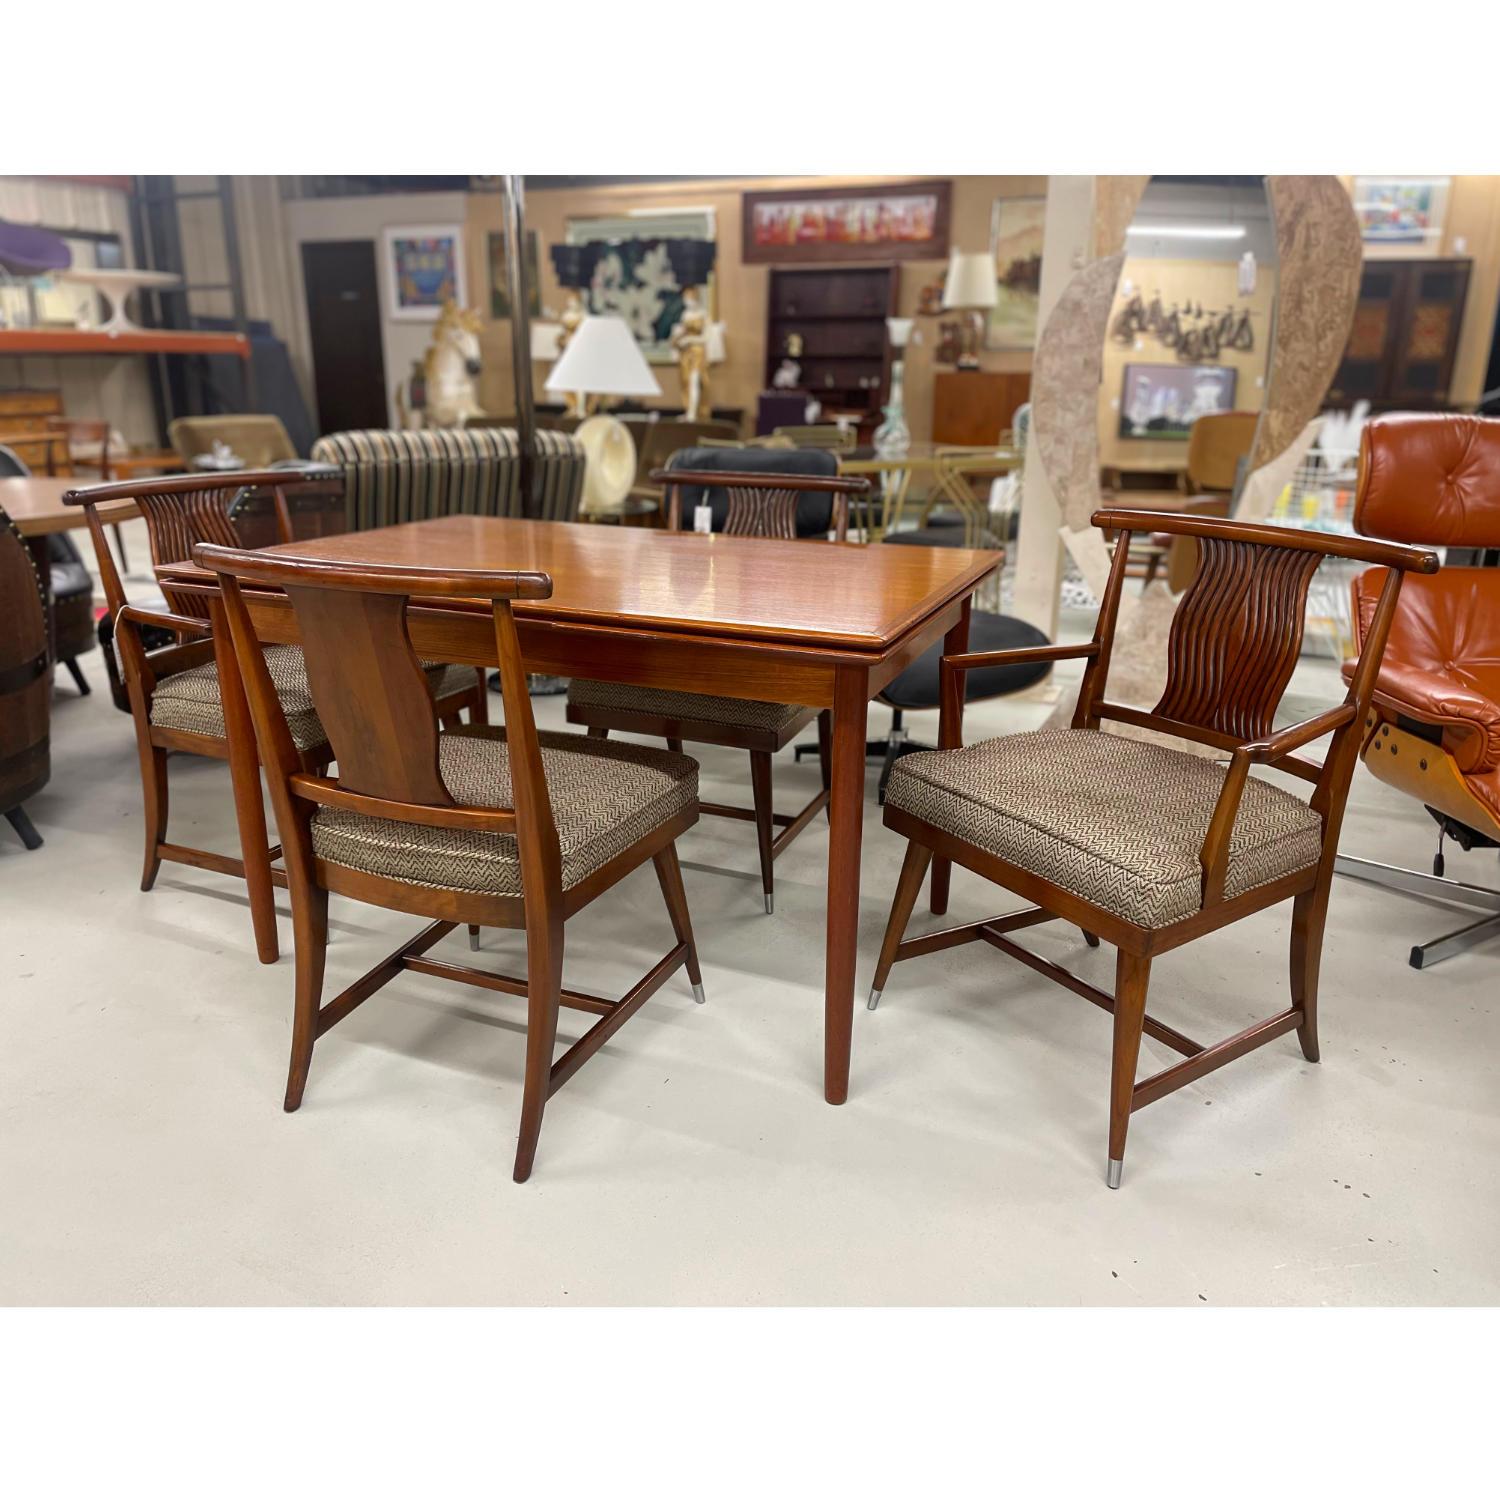 Set of four Mid-Century Modern dining chairs with Asian styling. The set of four includes two arm chairs and two armless side chairs. These chairs are an interesting marriage of modern, traditional and Chinoiserie elements. The vintage chairs have